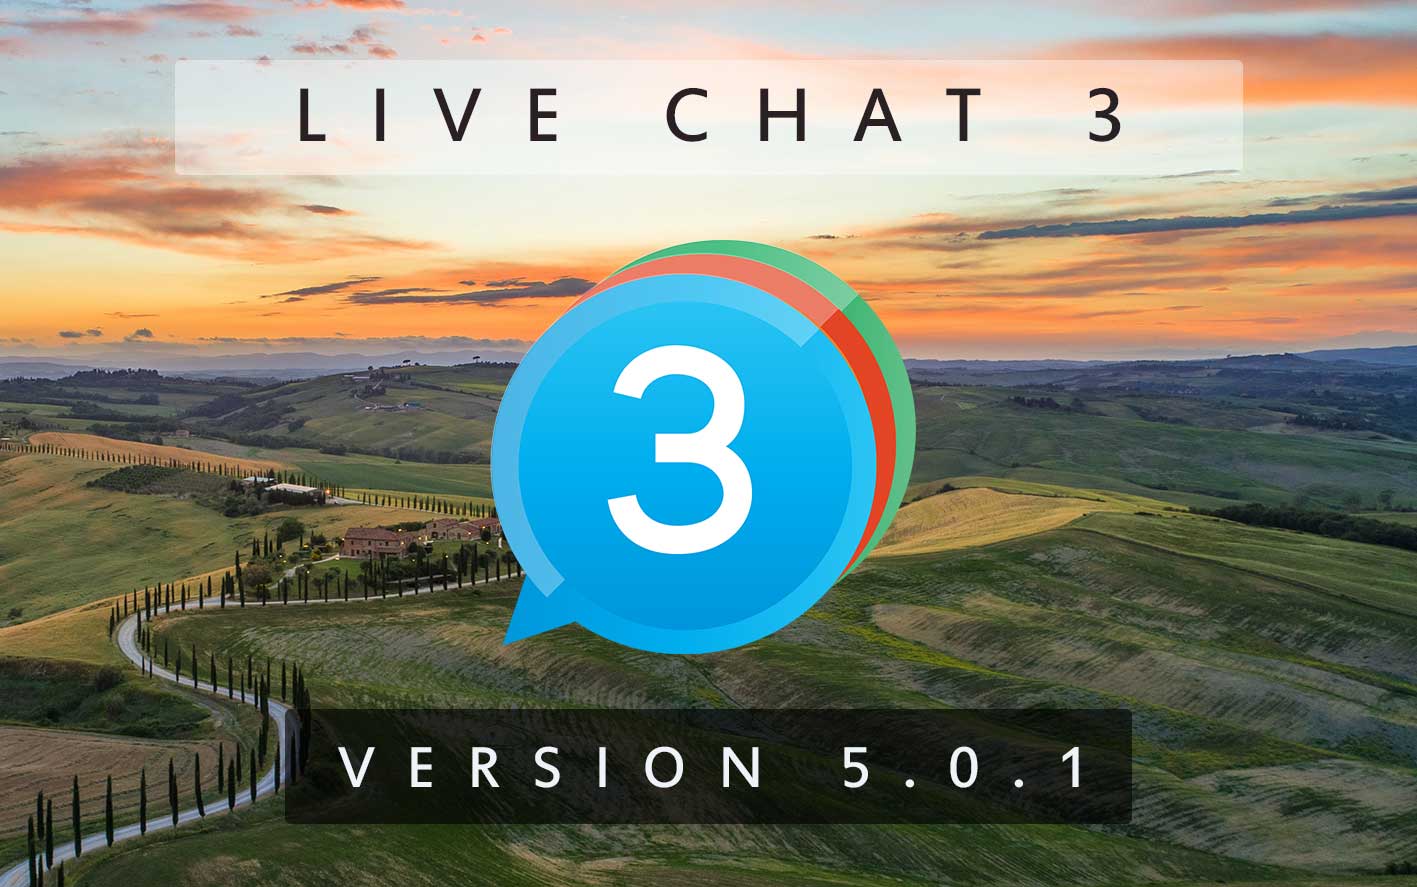 Live Chat 3 - Version 5.0.1